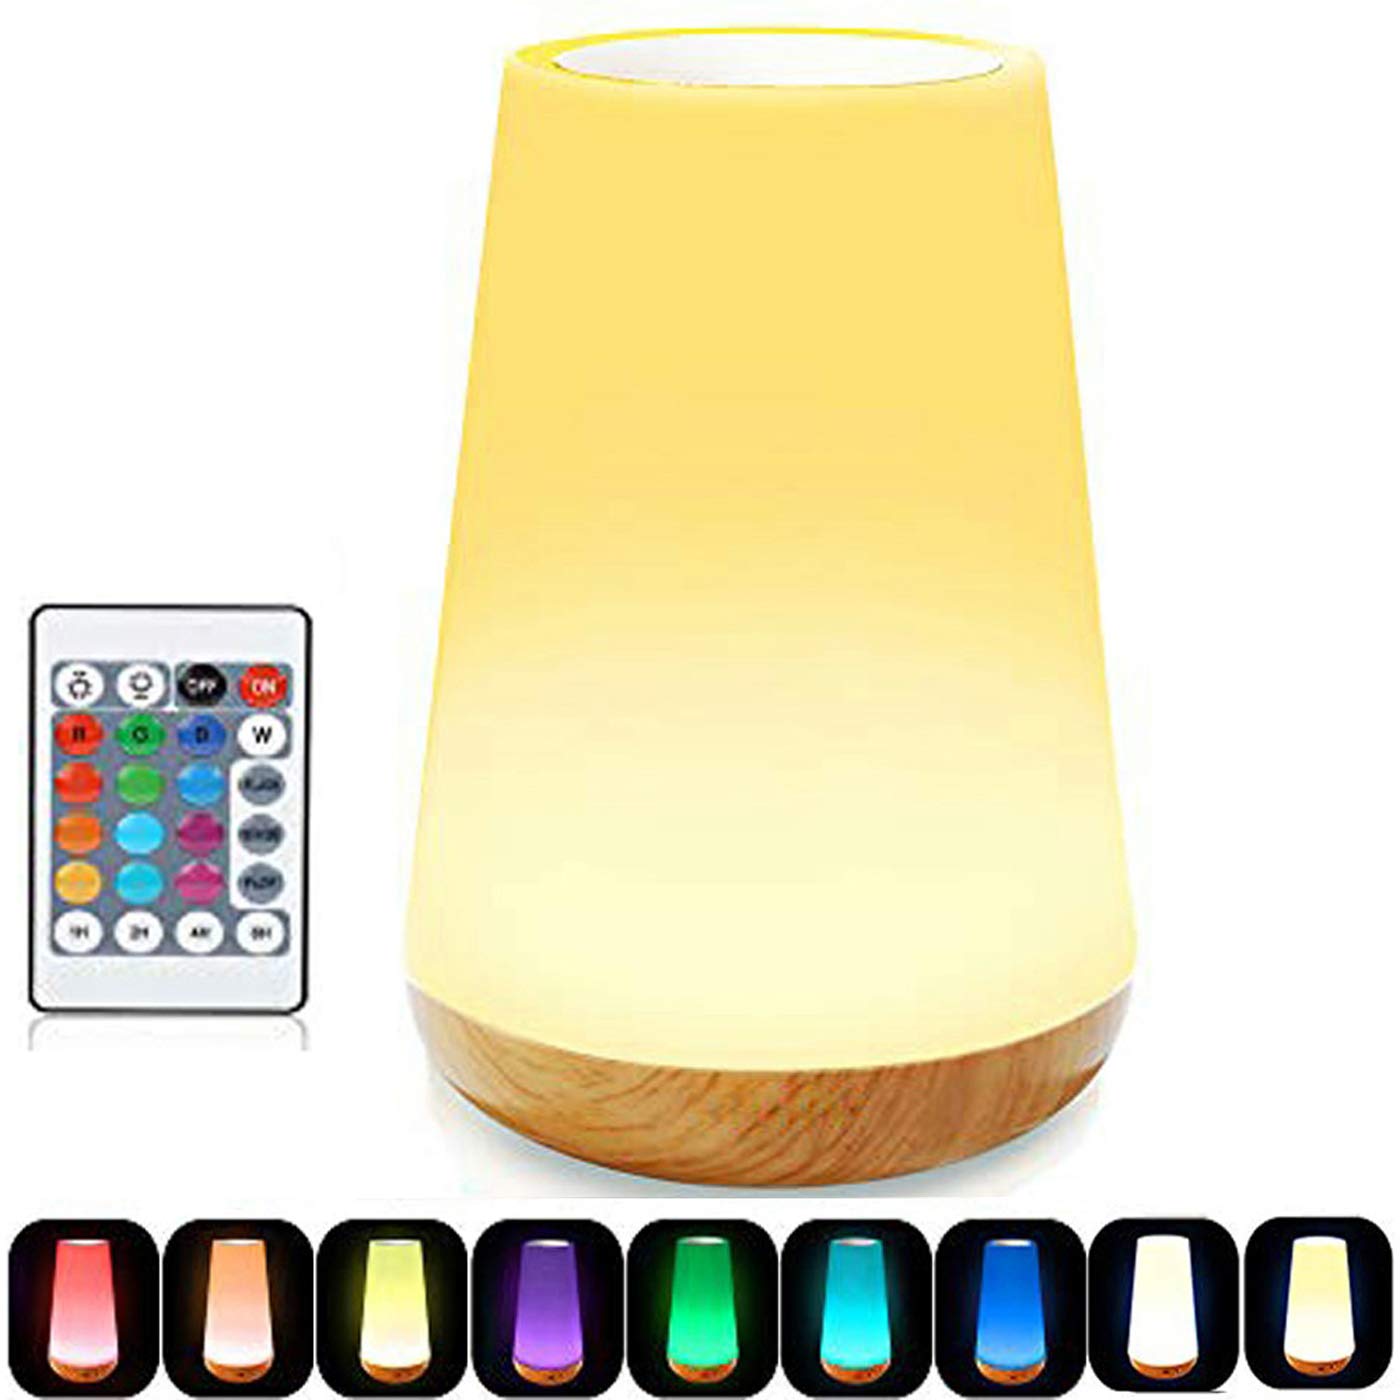 Caxmtu LED Night Light Touch Lamp Bedside Table Lamp for Kids Bedroom Rechargeable Dimmable with Remote Control and Timing Function Warm White Light + RGB Color Changing